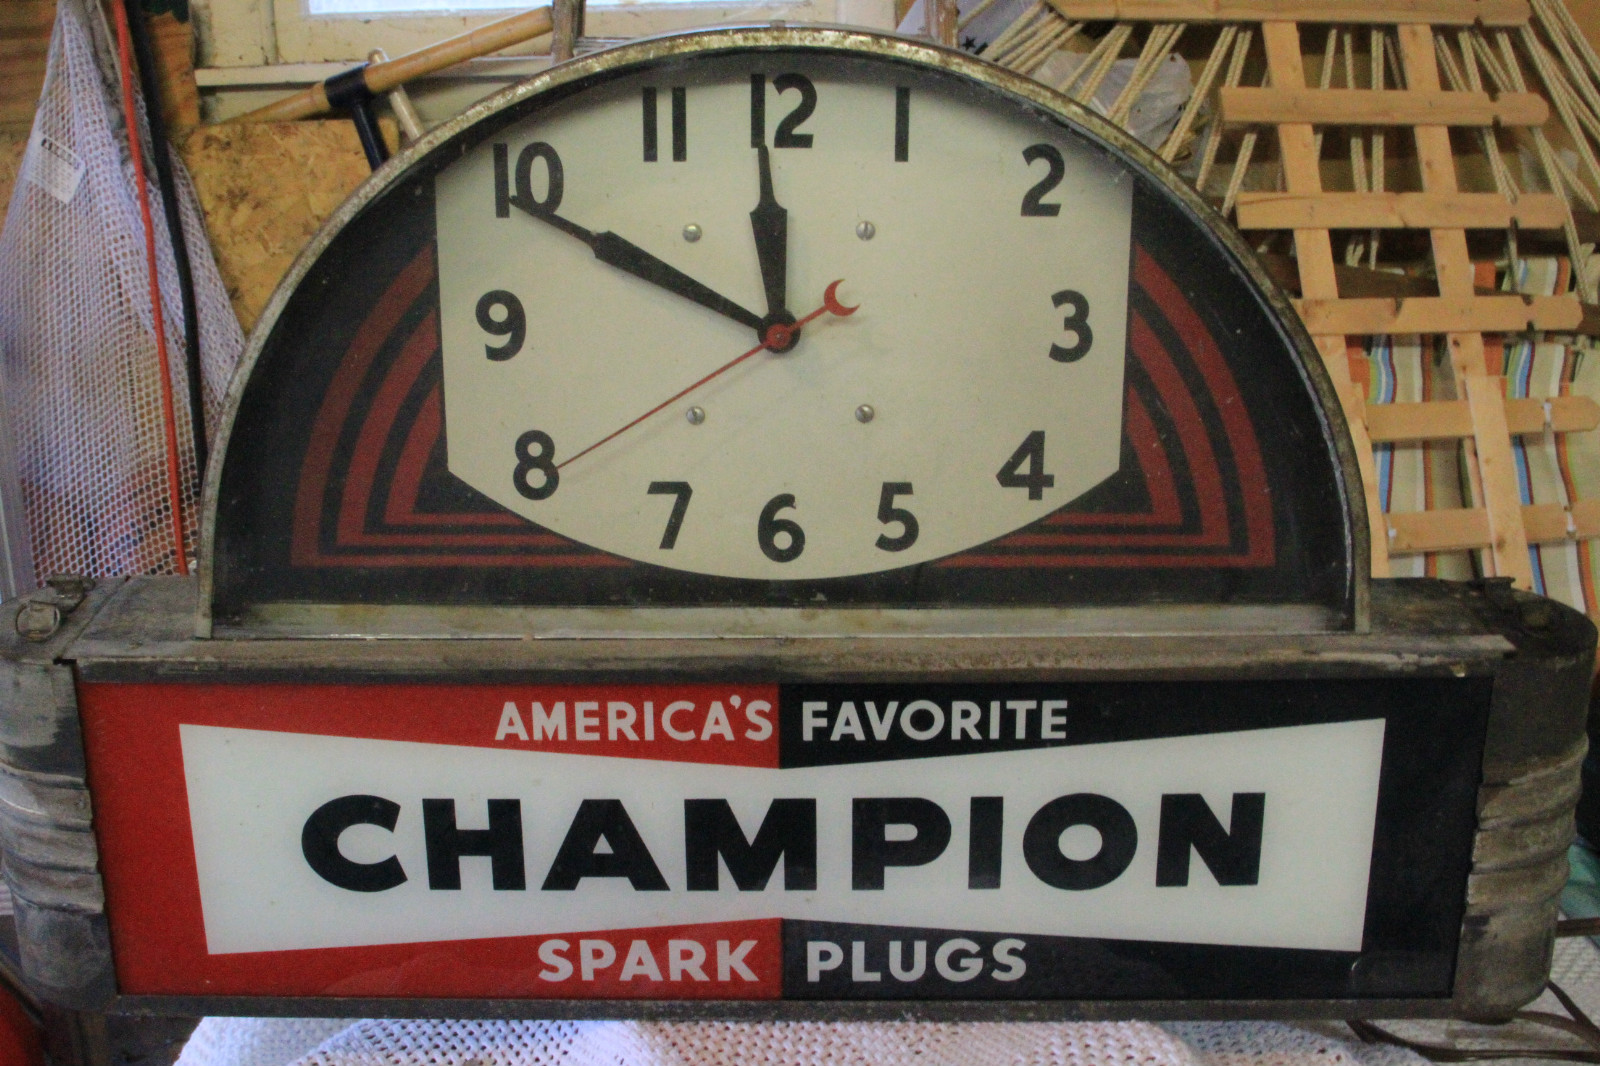 NEW CHAMPION SPARK PLUGS ADVERTISING BACKLIT LIGHTED RETRO CLOCK FREE SHIPPING